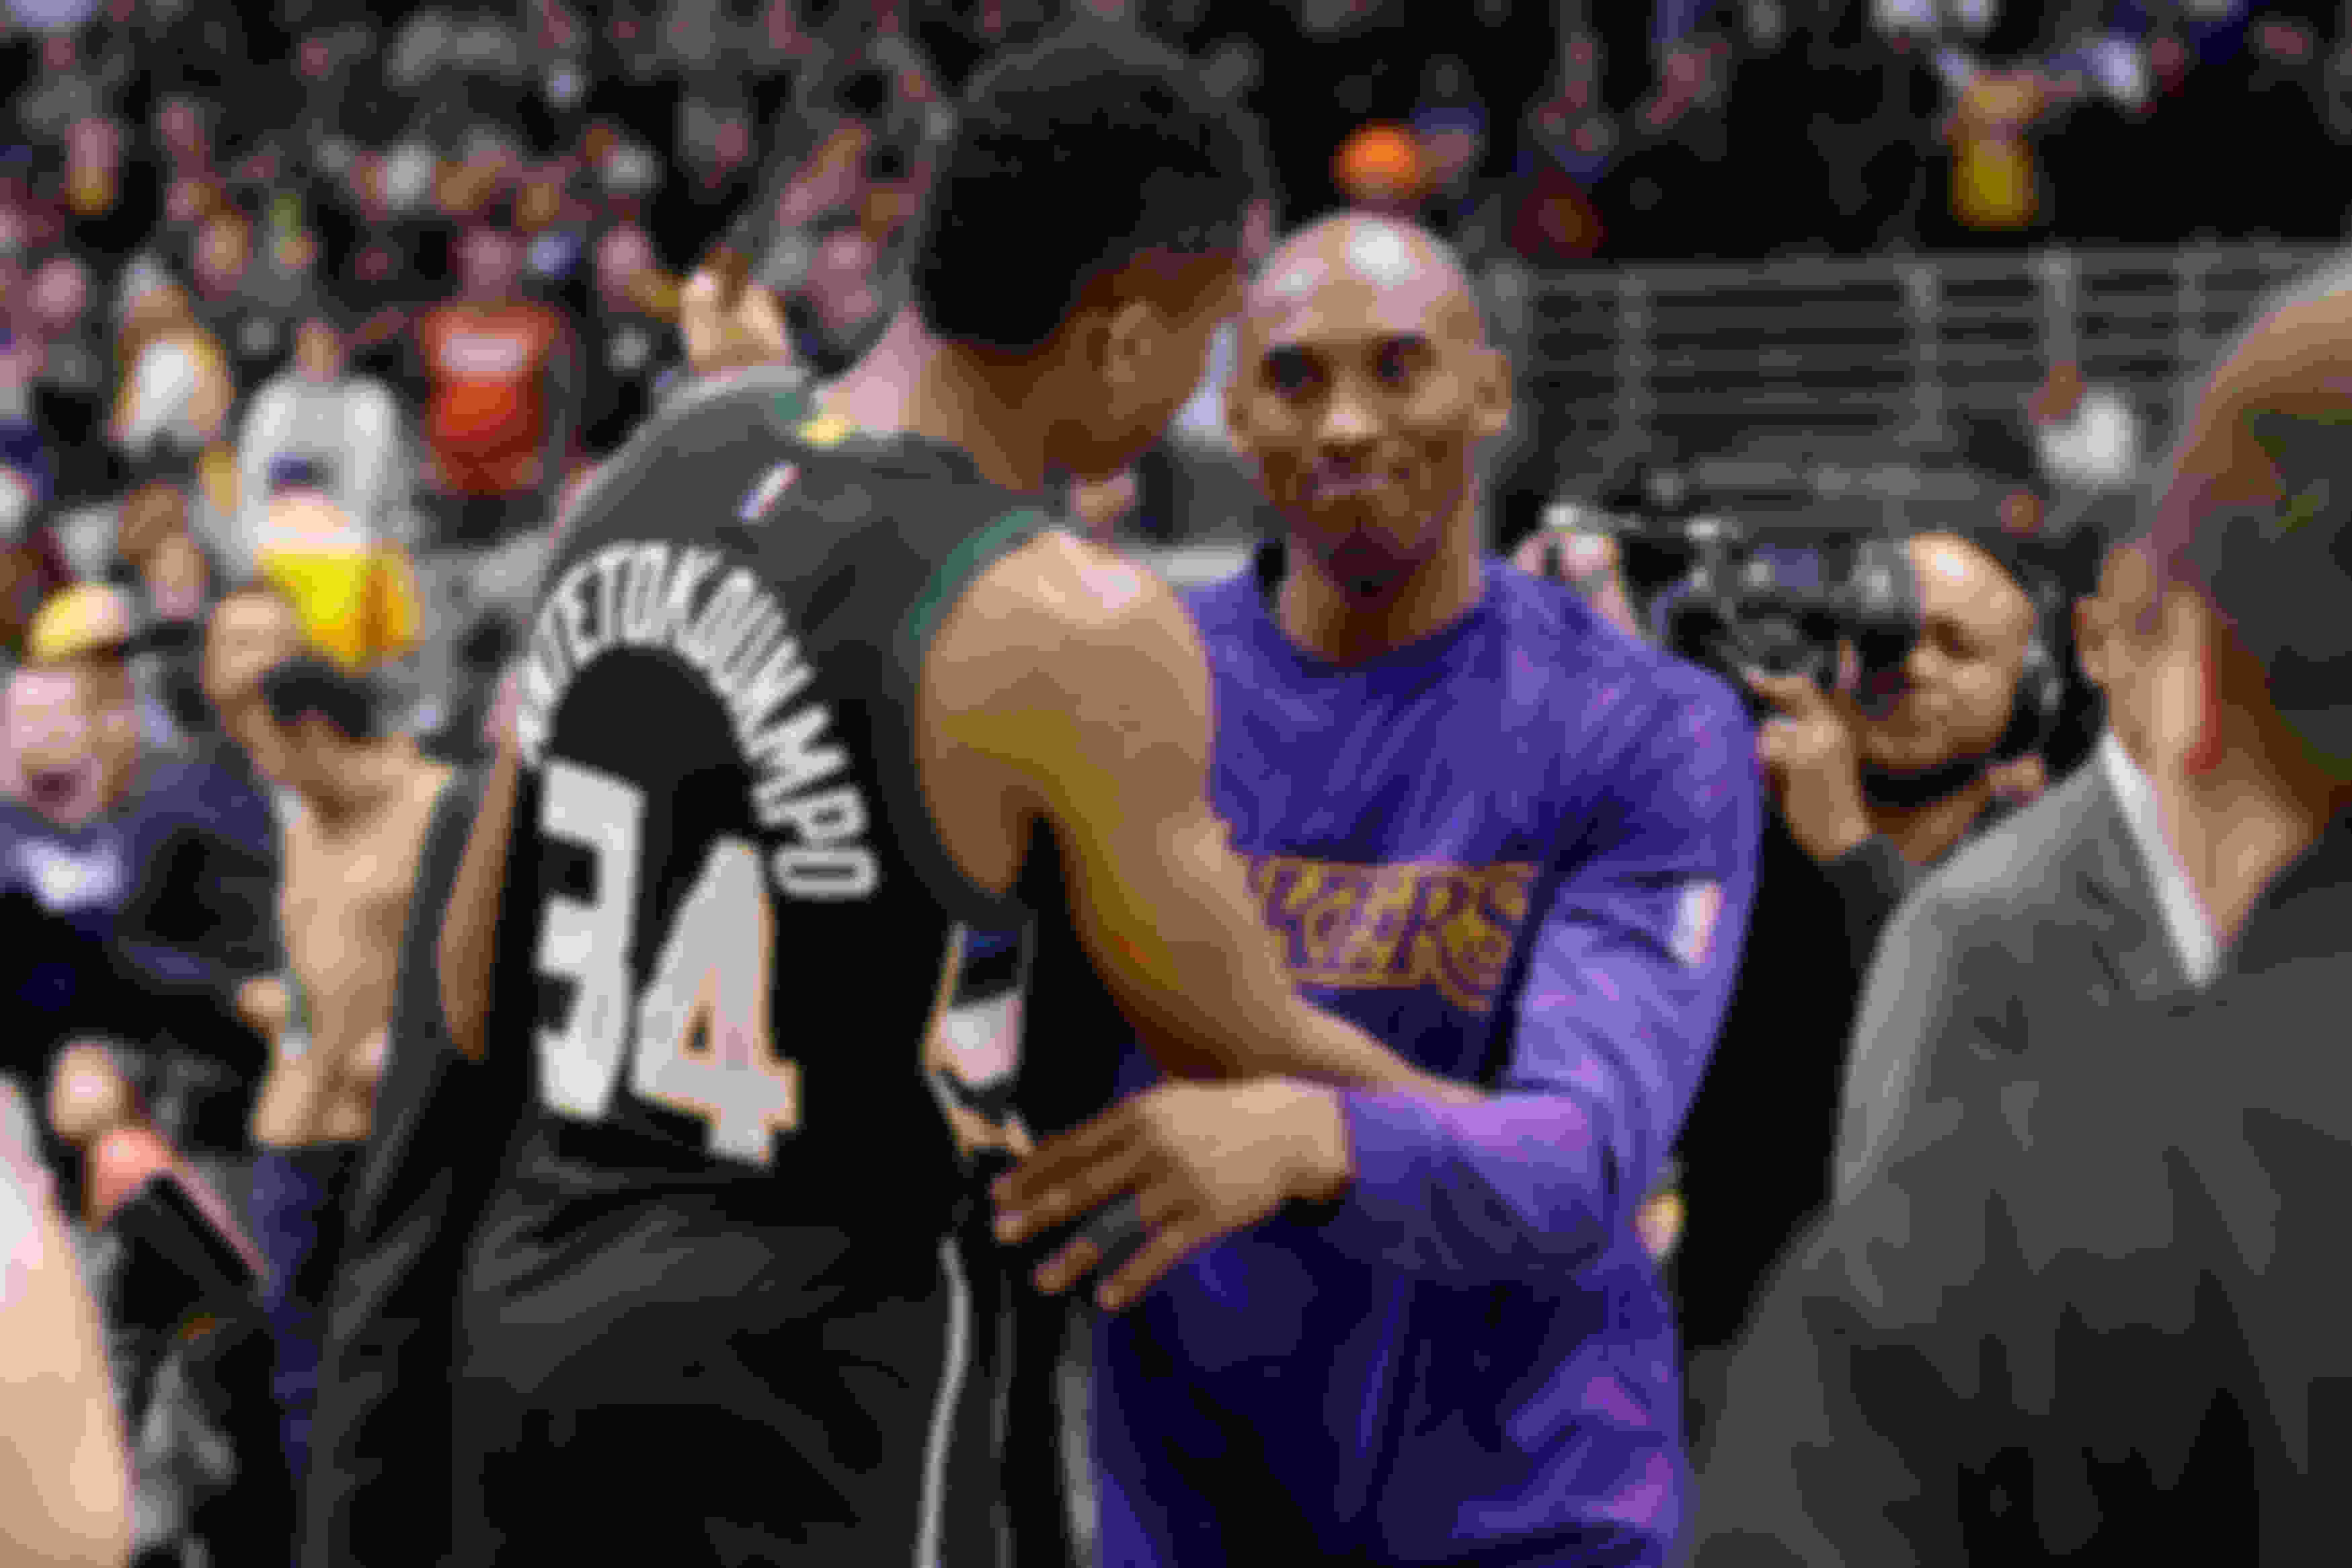 Kobe Bryant hugs Giannis Antetokounmpo after a Bucks v Lakers game in 2016.